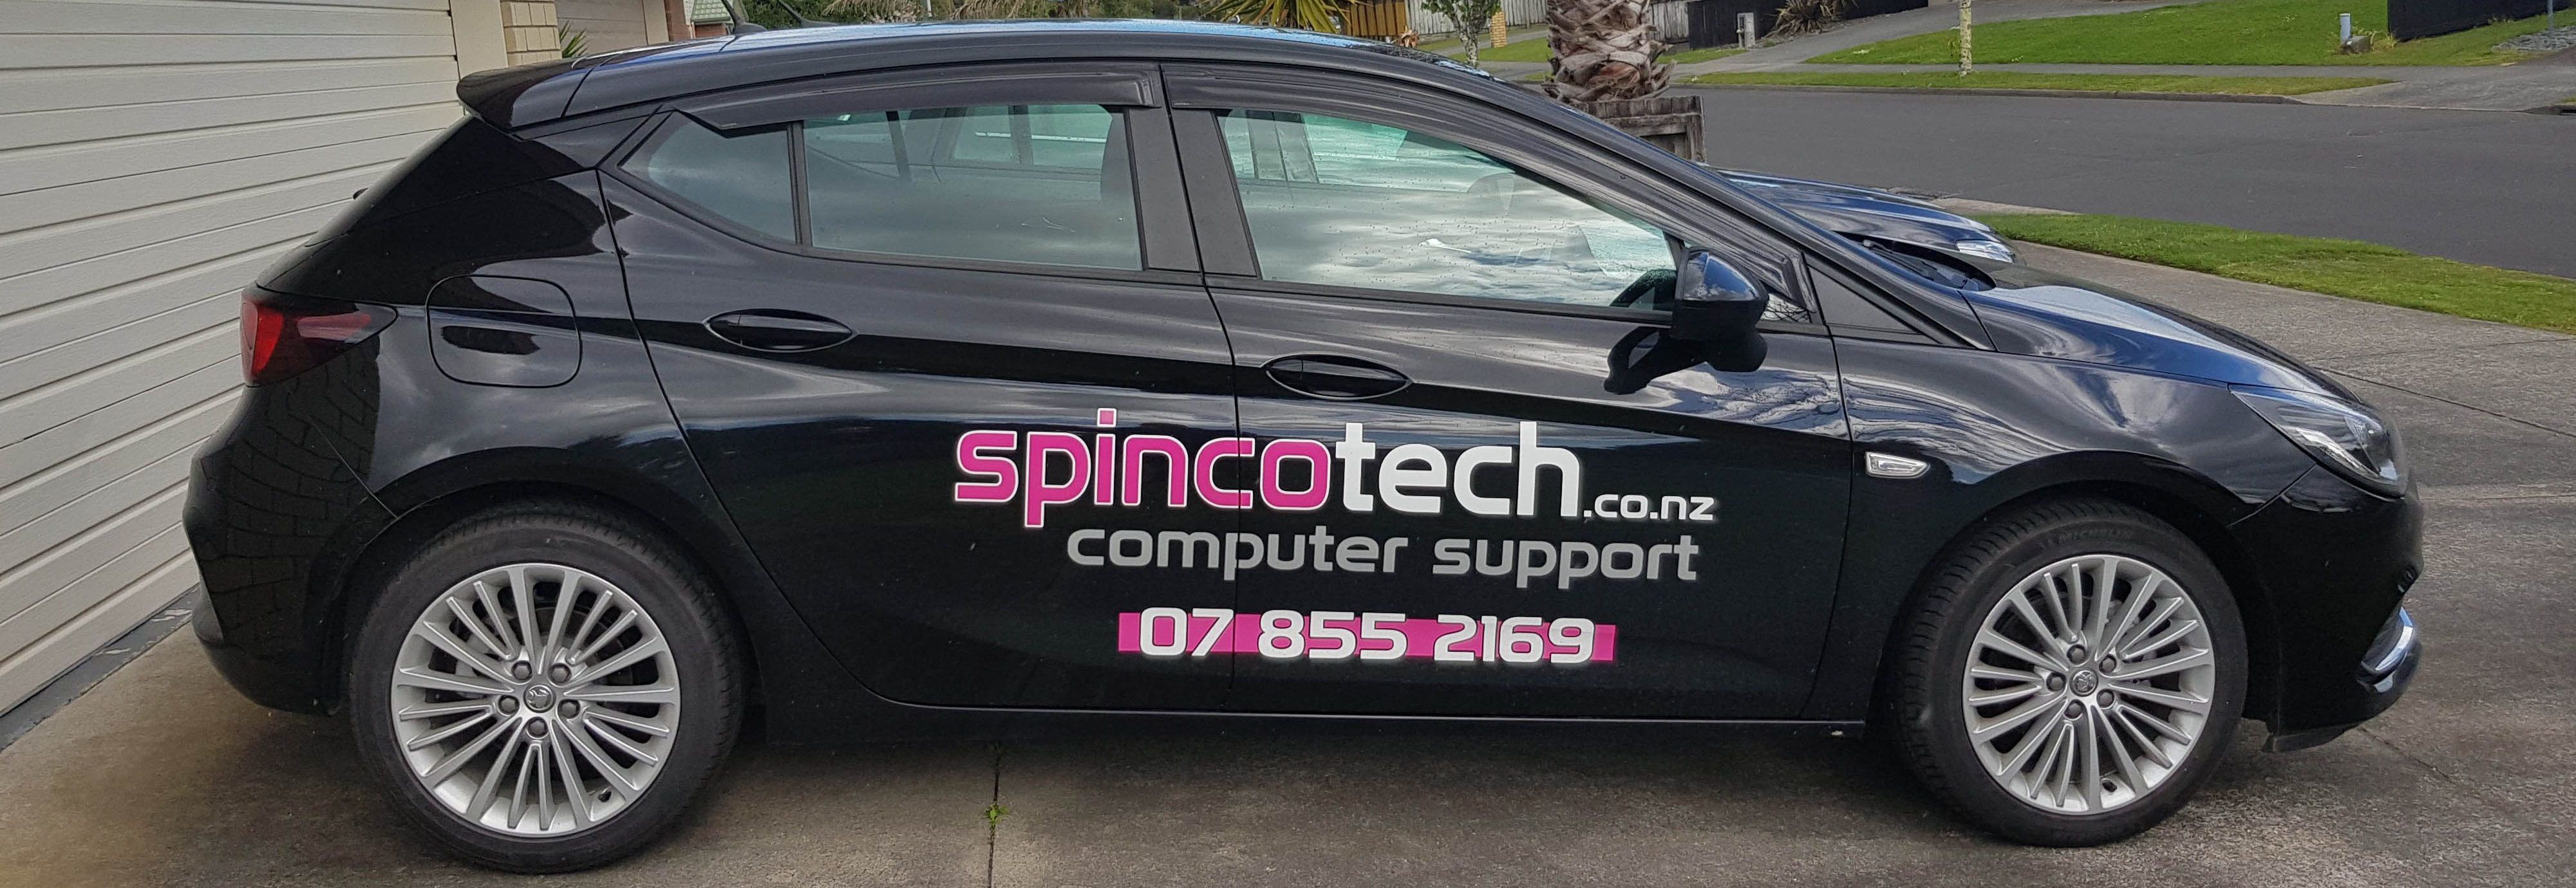 Spinco Technology Limited Hamilton And Waikato Computer Repairs 9034